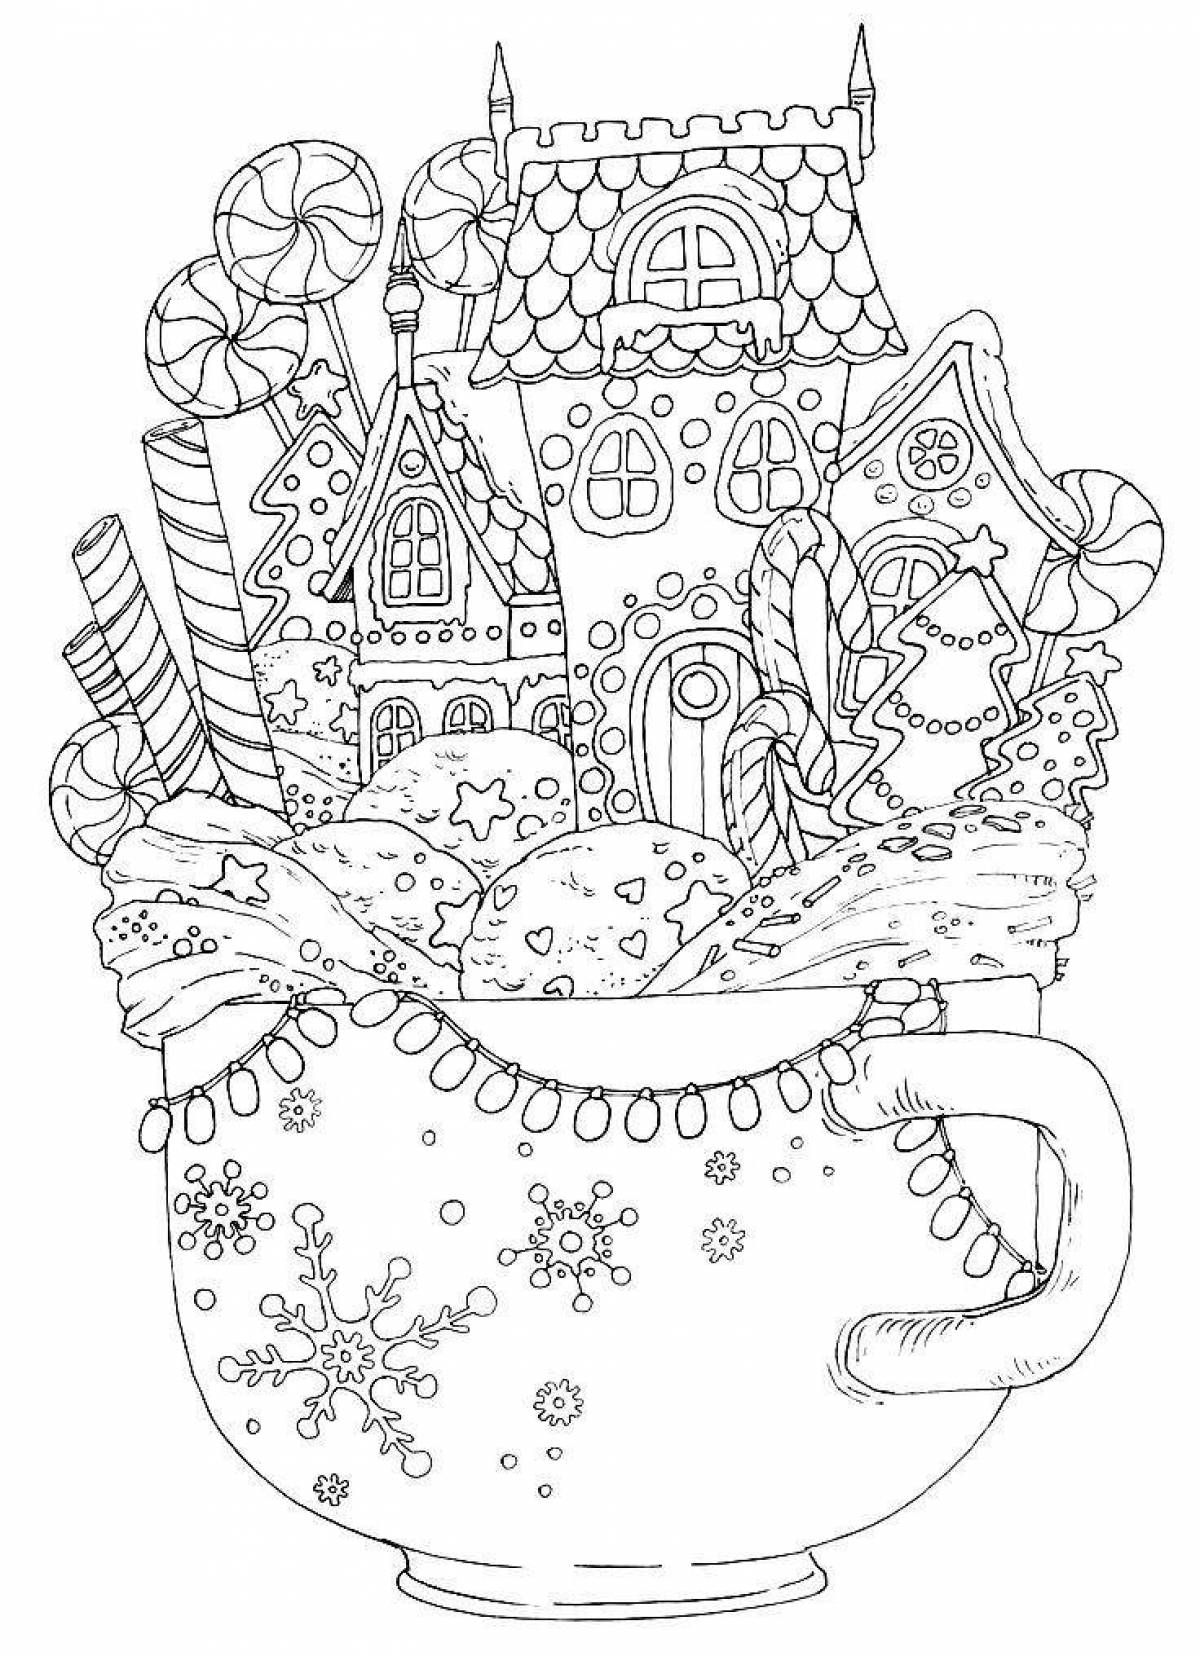 Live New Year antistress coloring book